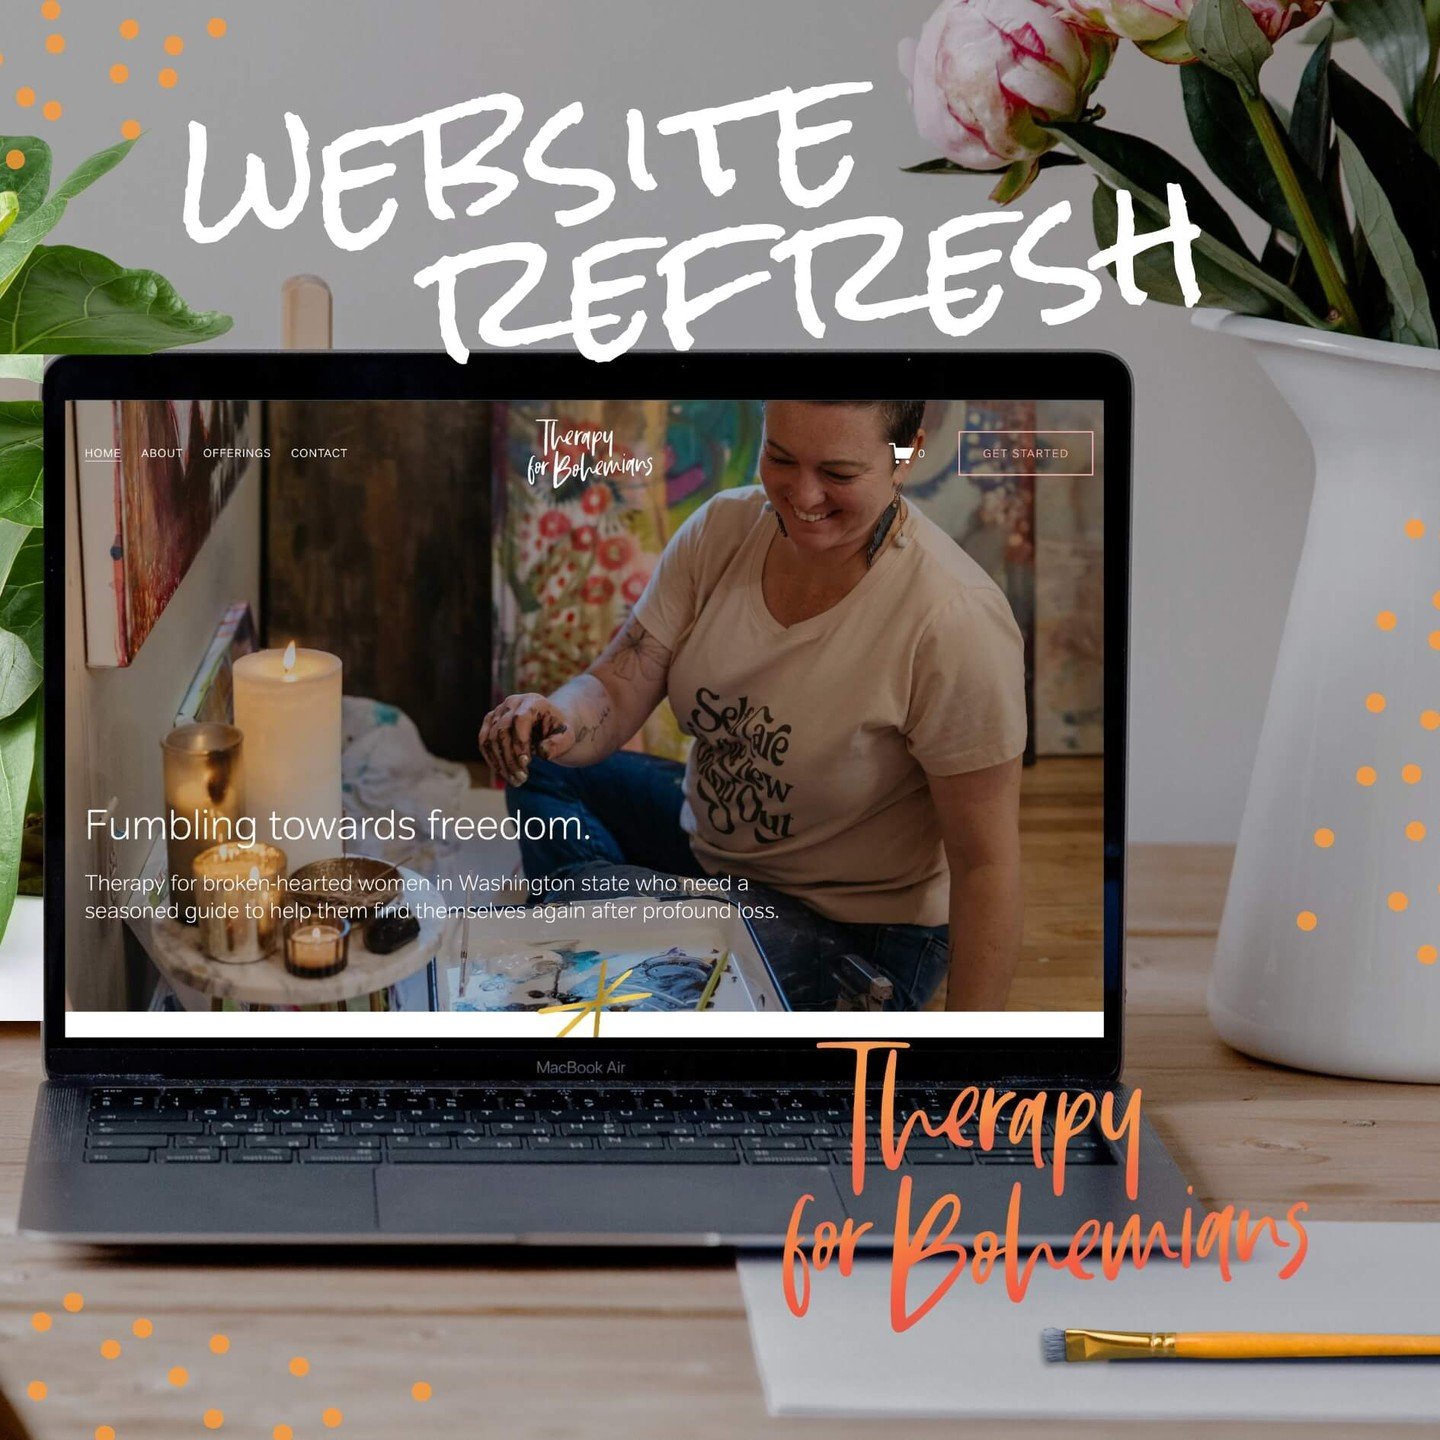 Is it Time for a Website Refresh? 🚀

Time flies, and even if you crafted a stunning website just a few years ago, the digital landscape (and our tastes) shift quickly. An outdated website sends the wrong message, making potential customers think twi